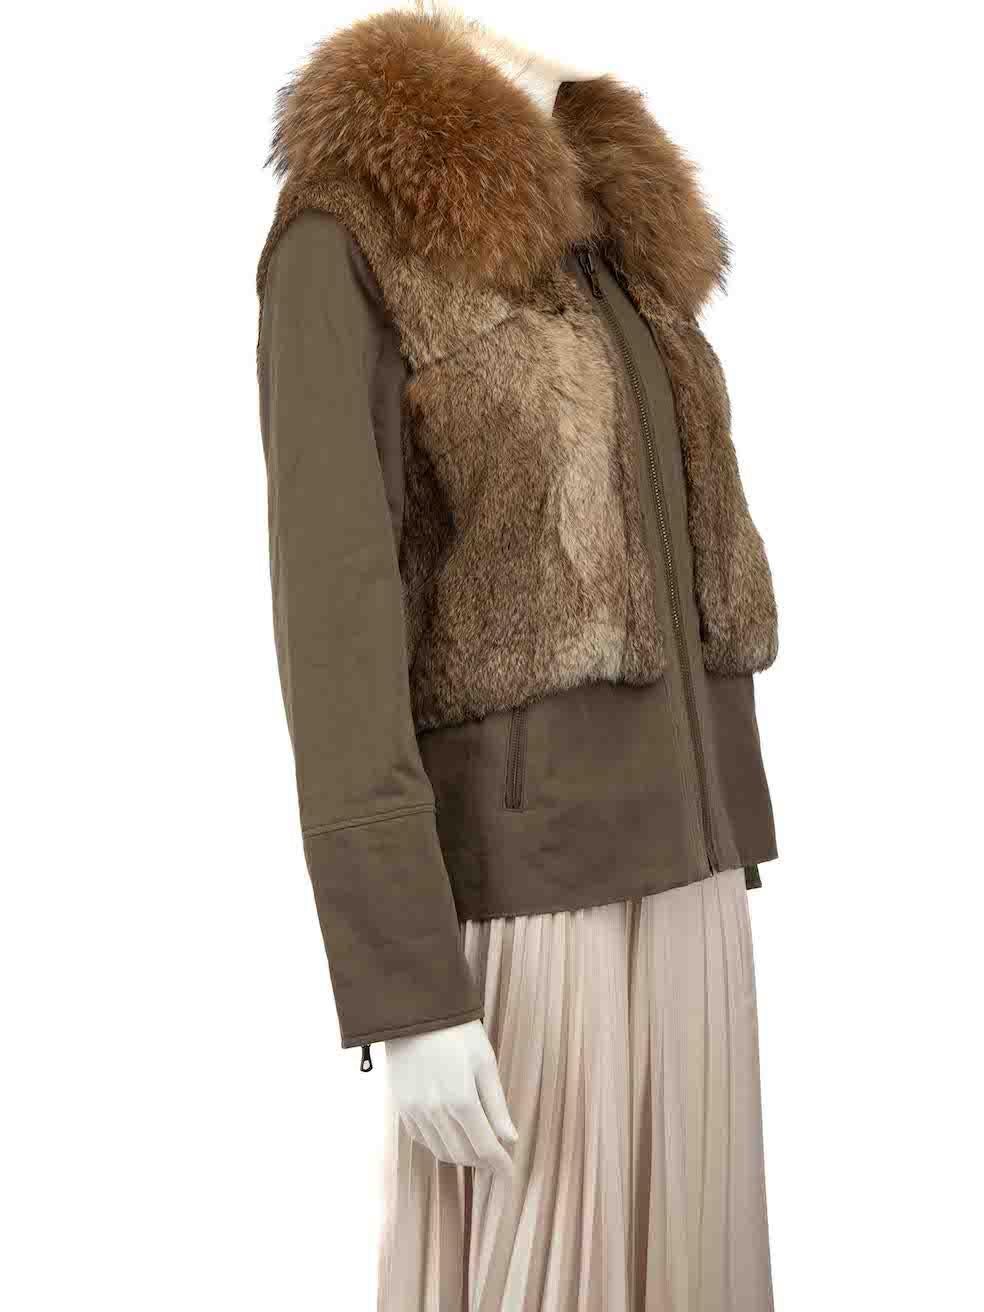 CONDITION is Very good. Hardly any visible wear to jacket is evident on this used Yves Salomon designer resale item.
 
 
 
 Details
 
 
 Khaki
 
 Cotton
 
 Bomber jacket
 
 Short length
 
 Zip removable rabbit fur panelled
 
 Front zip closure
 
